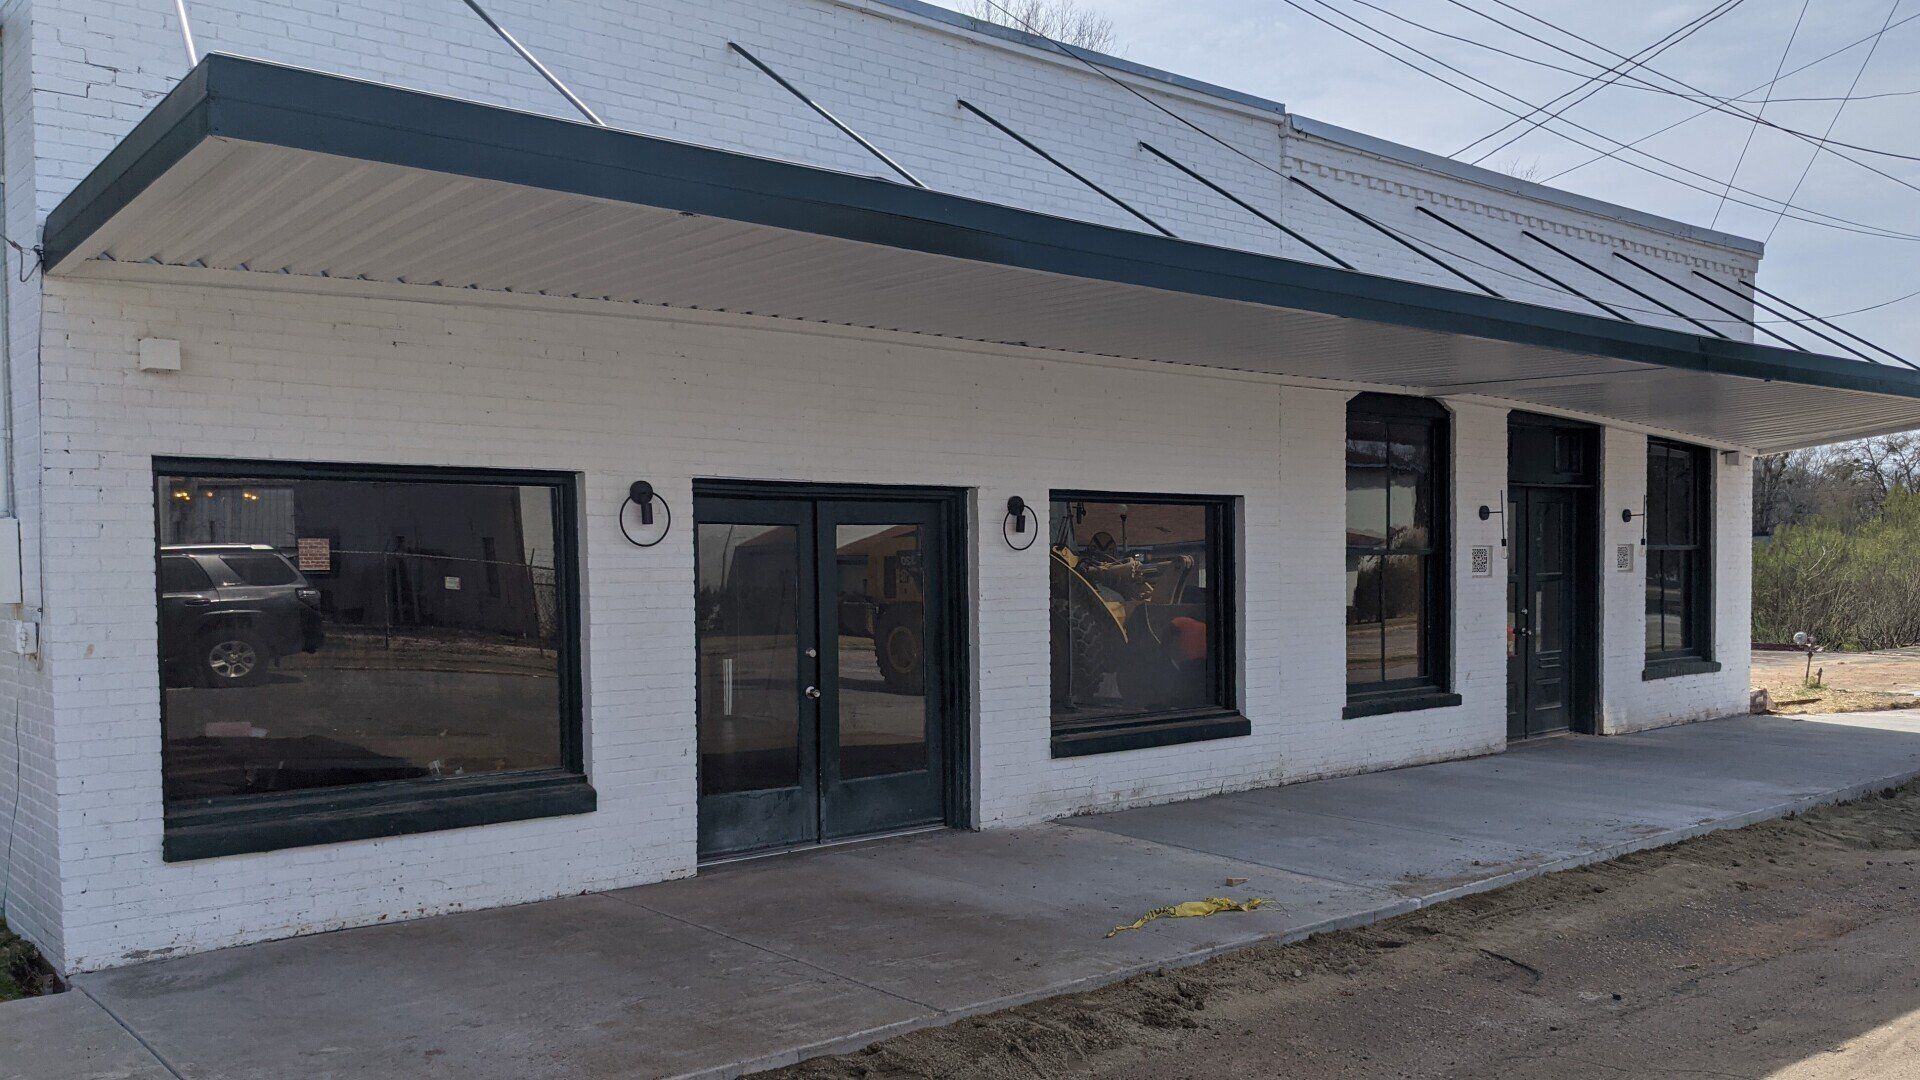 window tinting in Opelika, AL - The building needed a modern touch and inviting atmosphere inside, before SPF Leading-Performance Tint installed to this storefront in Opelika, AL